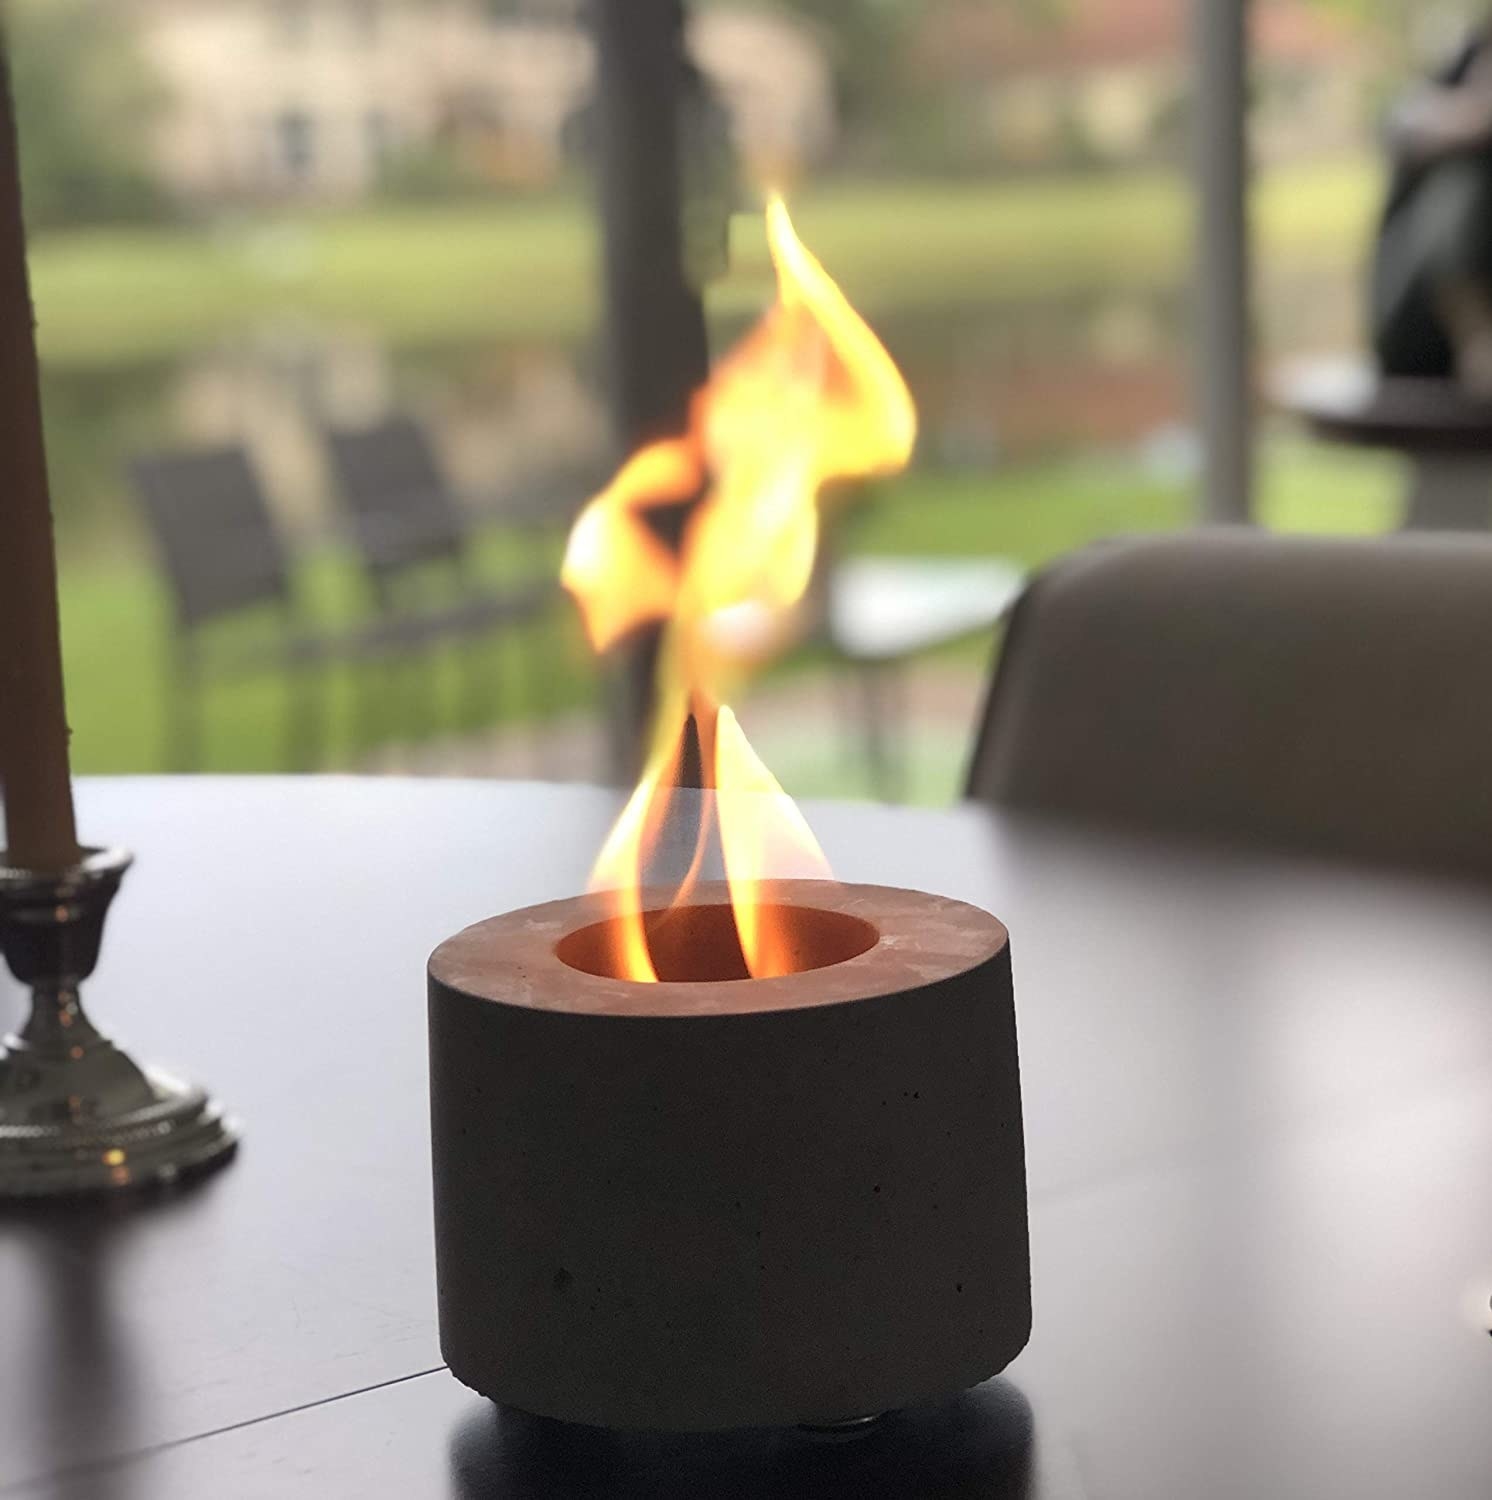 Gray fire pit with lit flame on table outdoors 